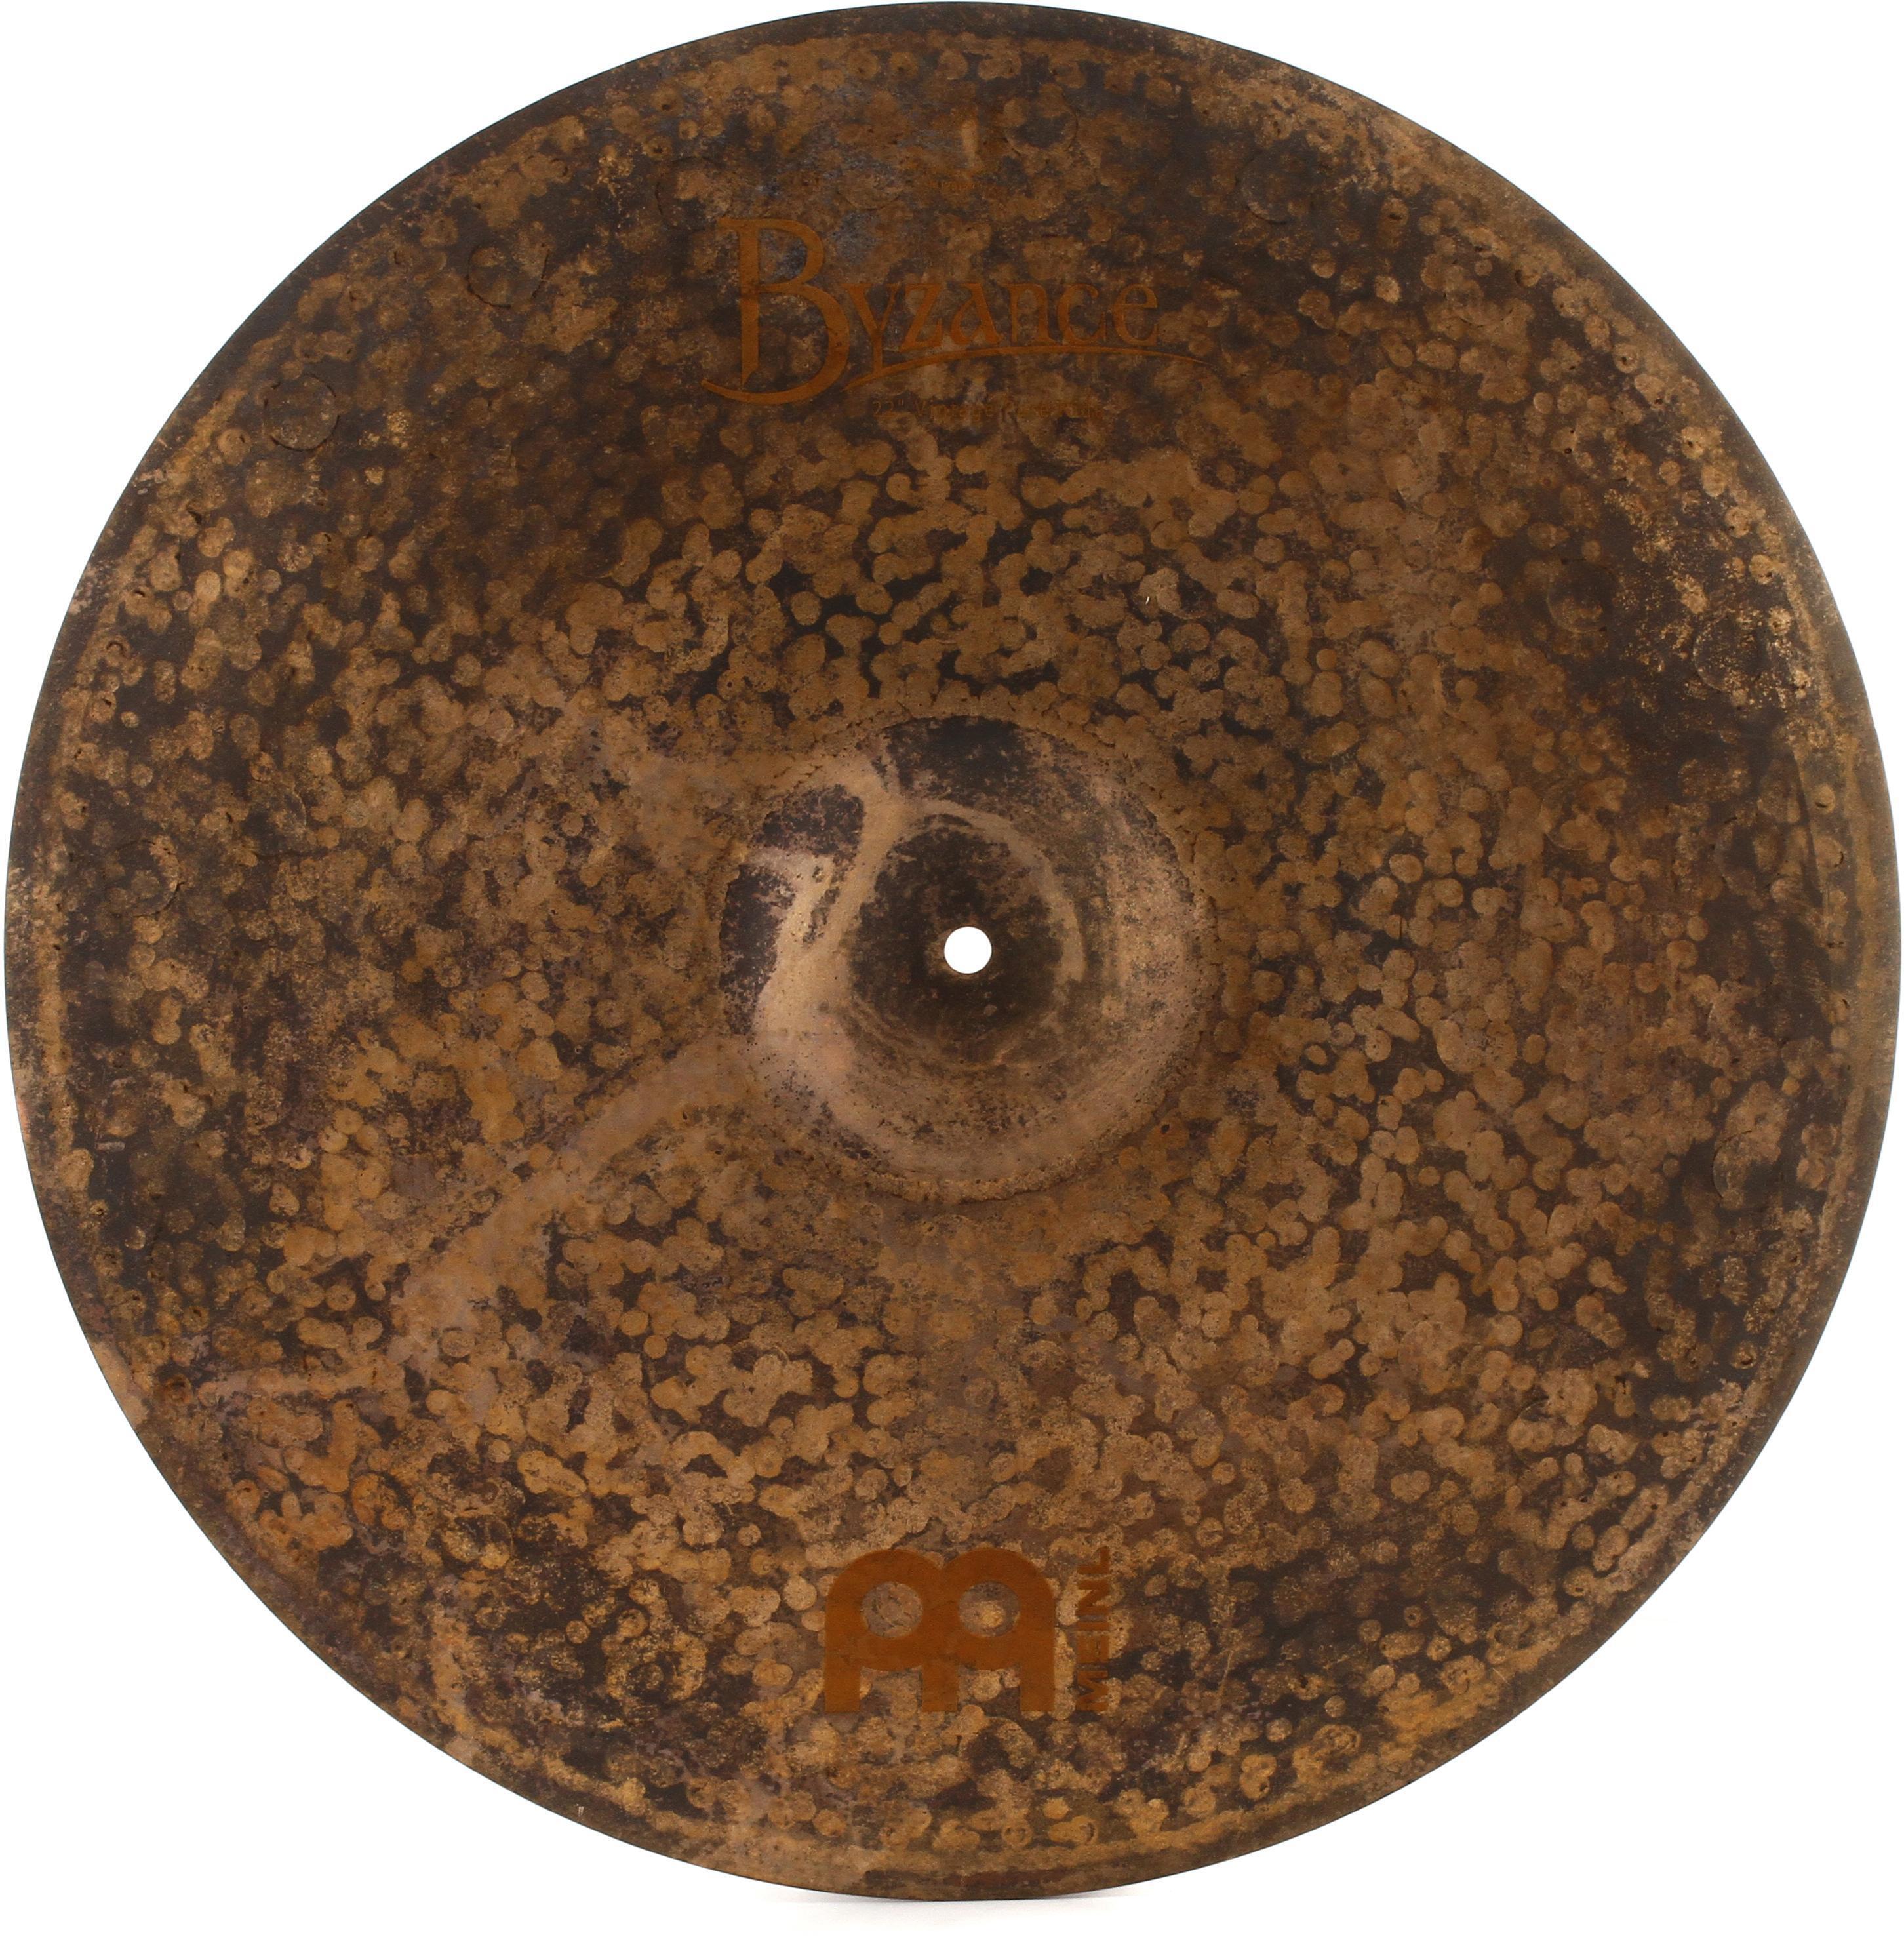 Meinl Cymbals 22 inch Byzance Vintage Pure Ride Cymbal